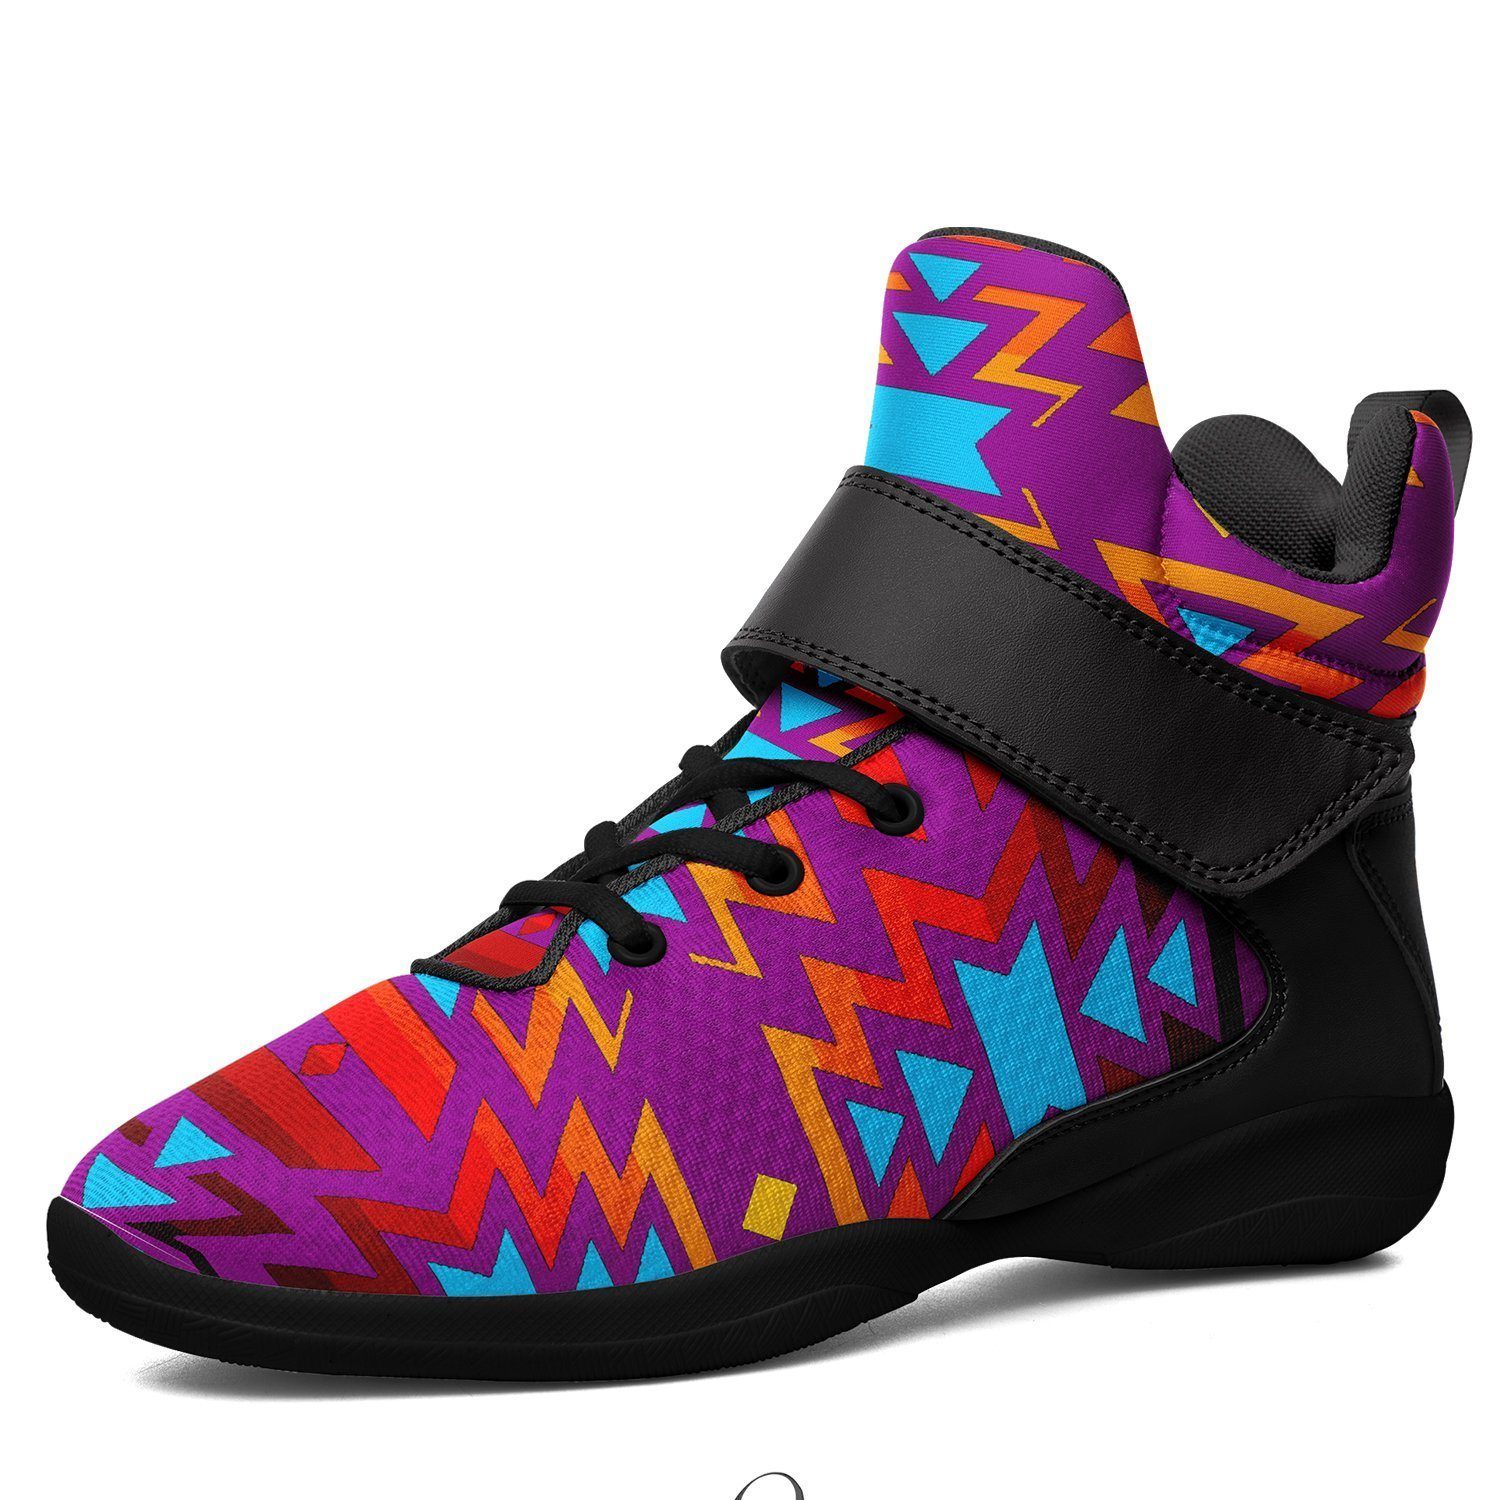 Fire Colors and Turquoise Purple Ipottaa Basketball / Sport High Top Shoes - Black Sole 49 Dzine US Men 7 / EUR 40 Black Sole with Black Strap 